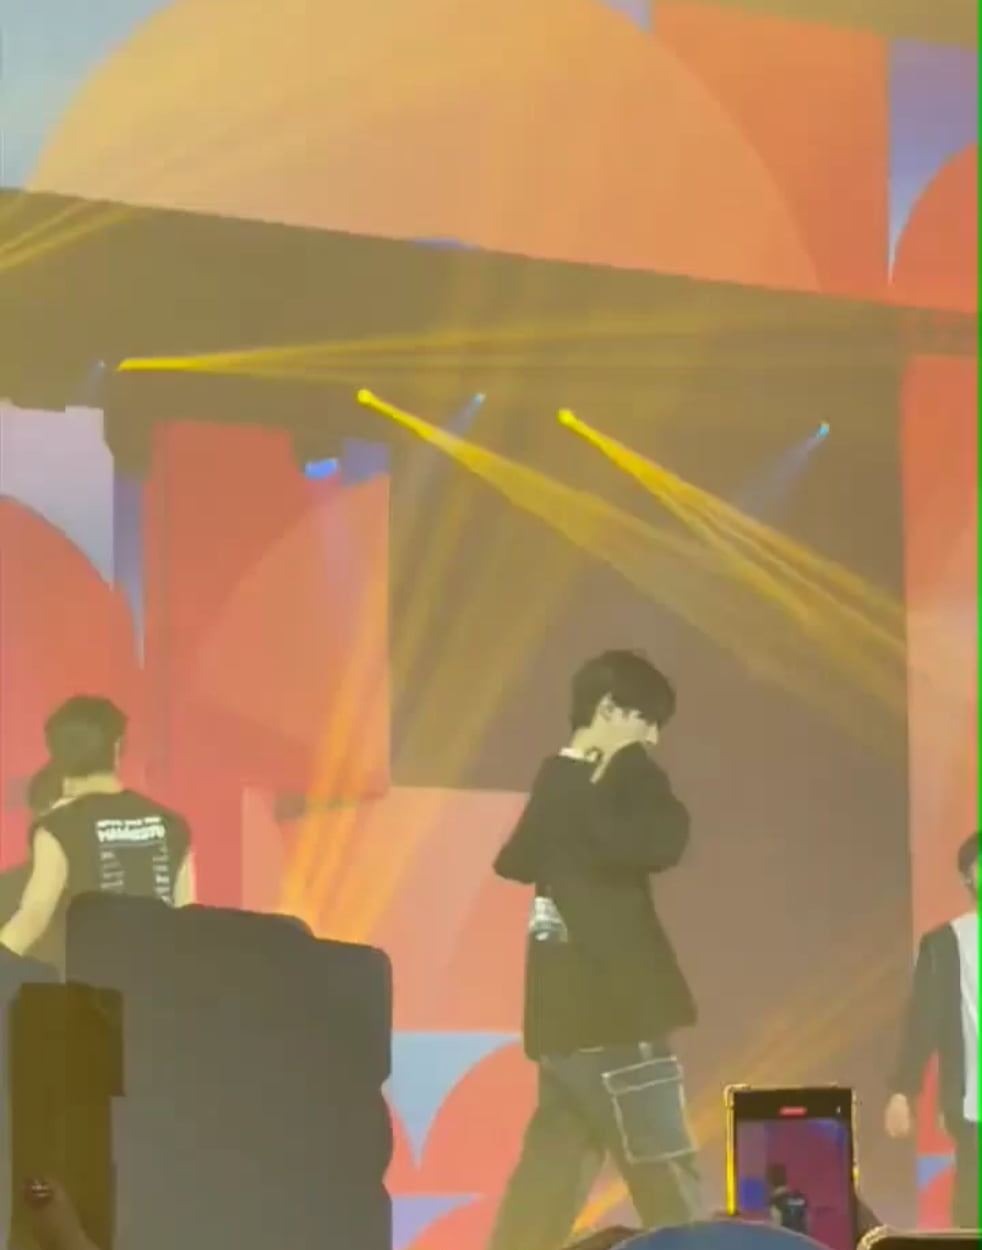 What concert is this from?